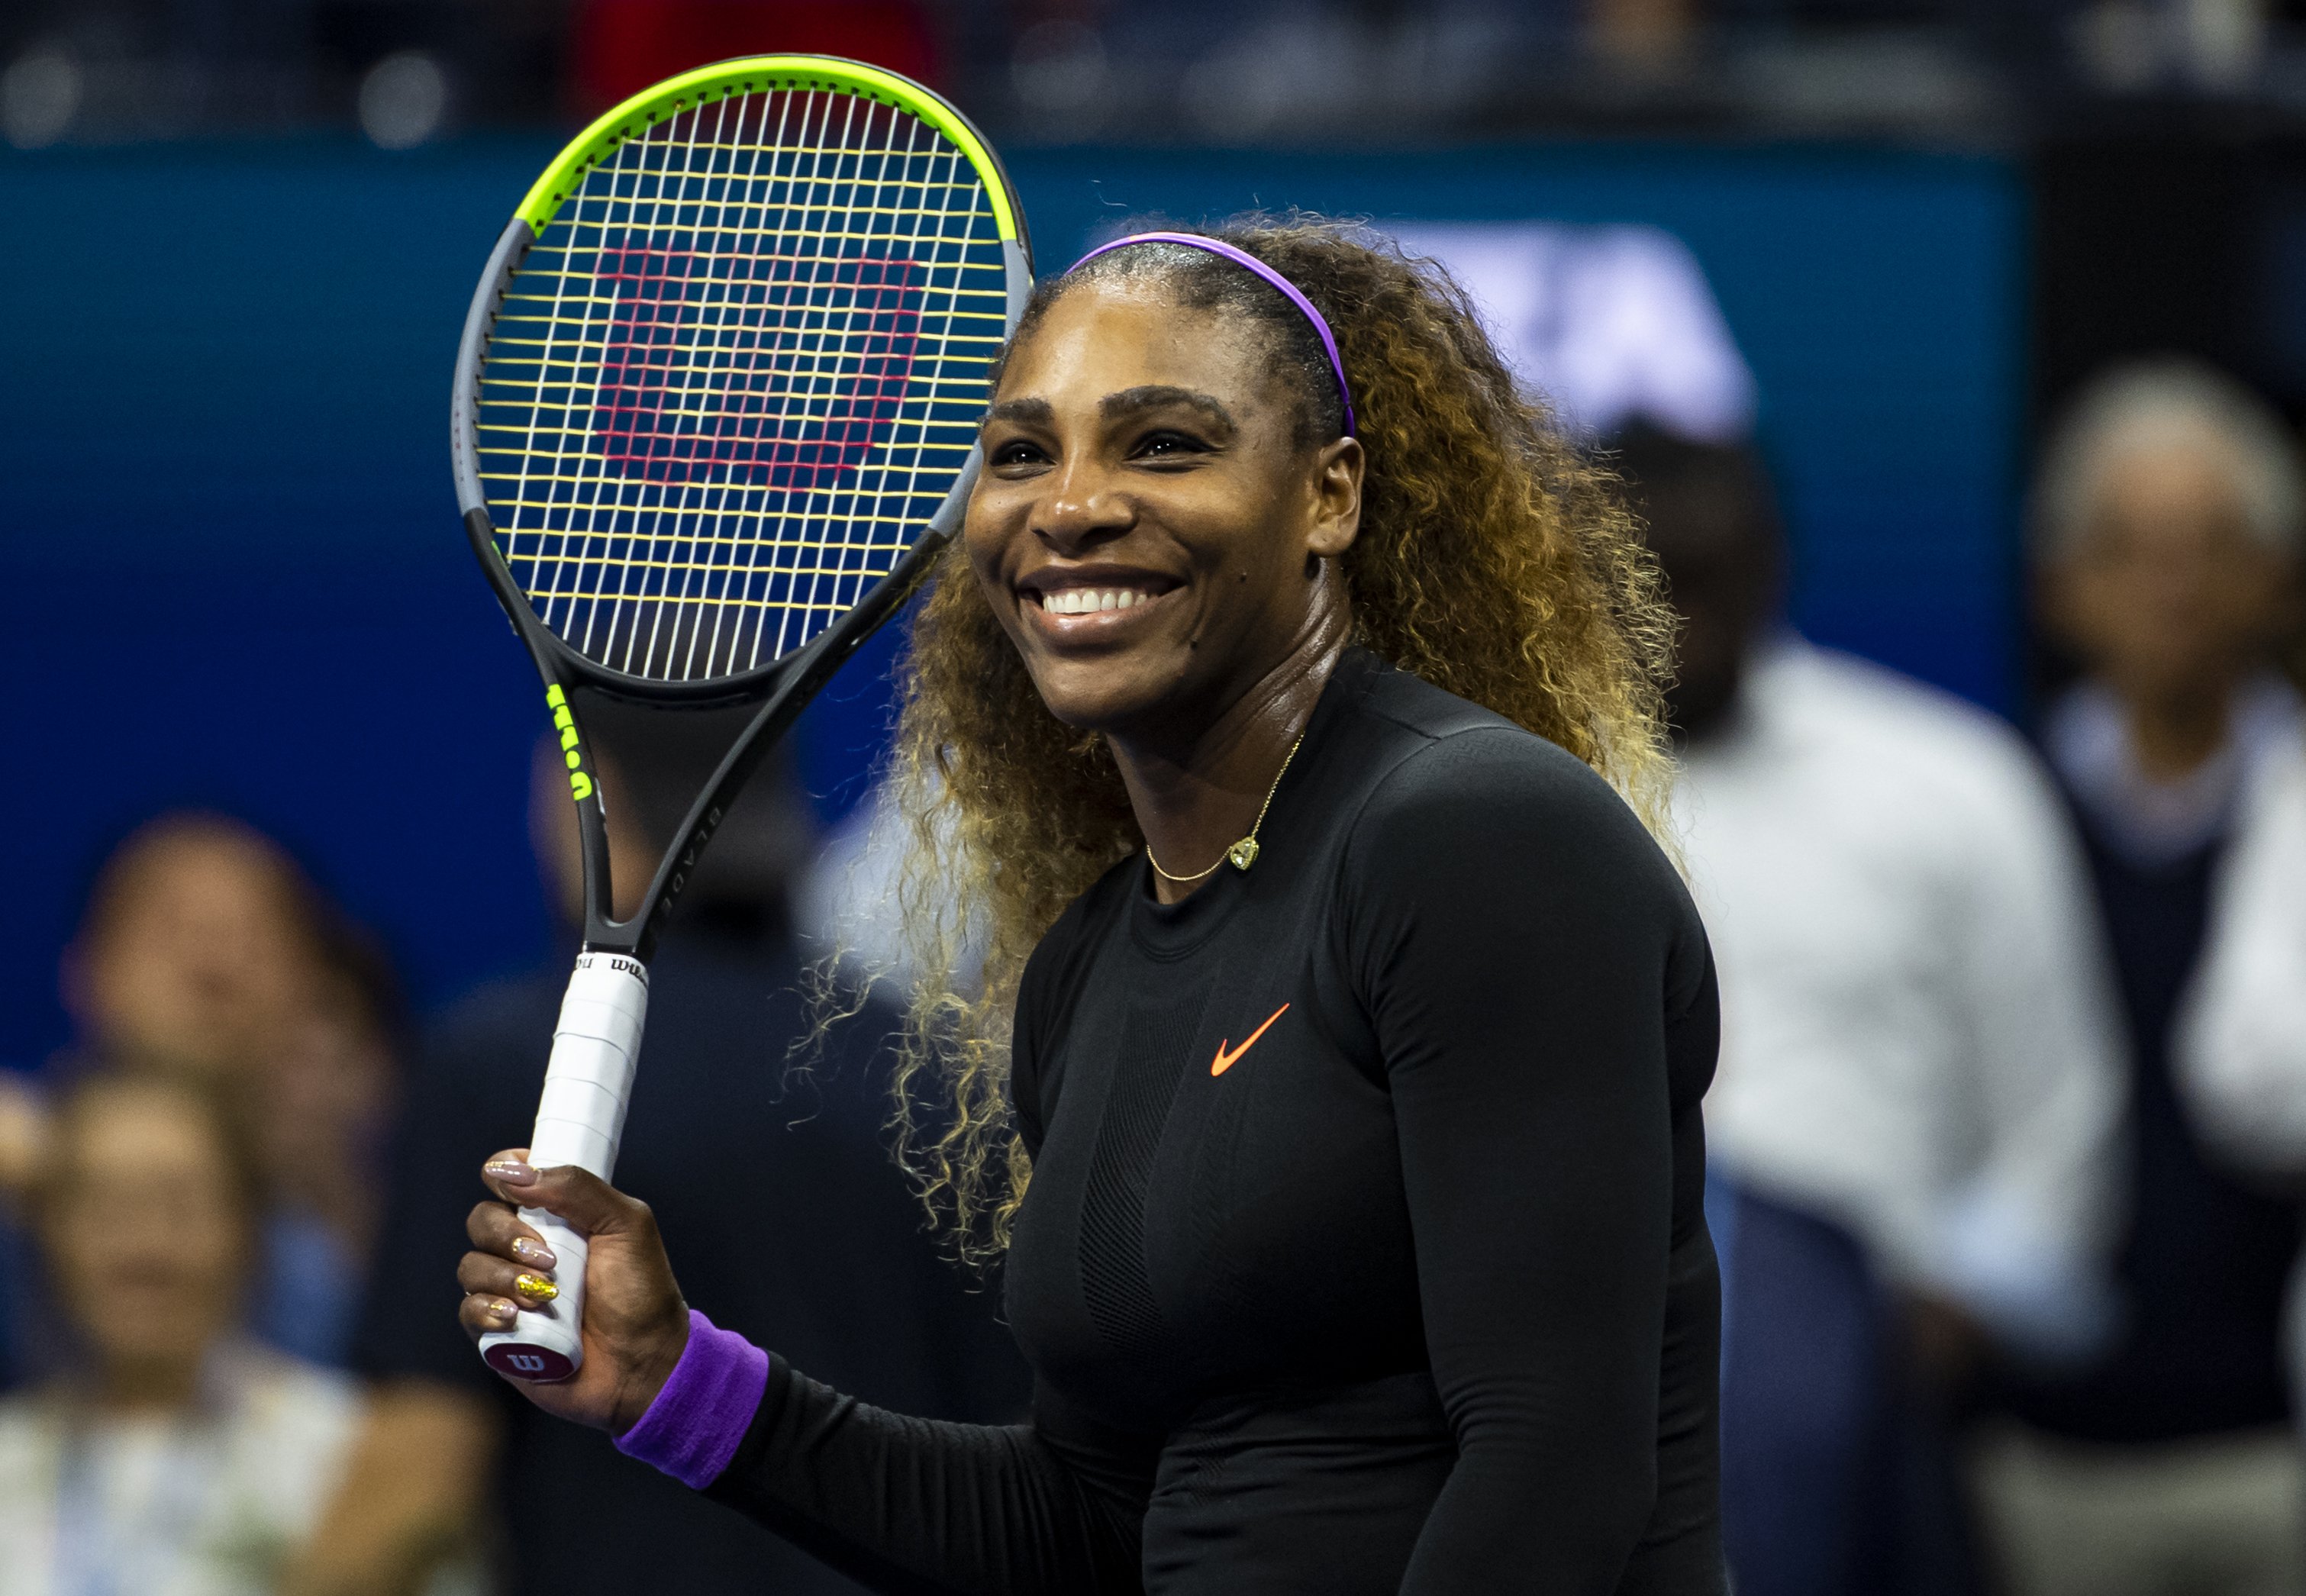 Serena Williams at the USTA Billie Jean King National Tennis Center on September 05, 2019 in New York City | Photo: Getty Images